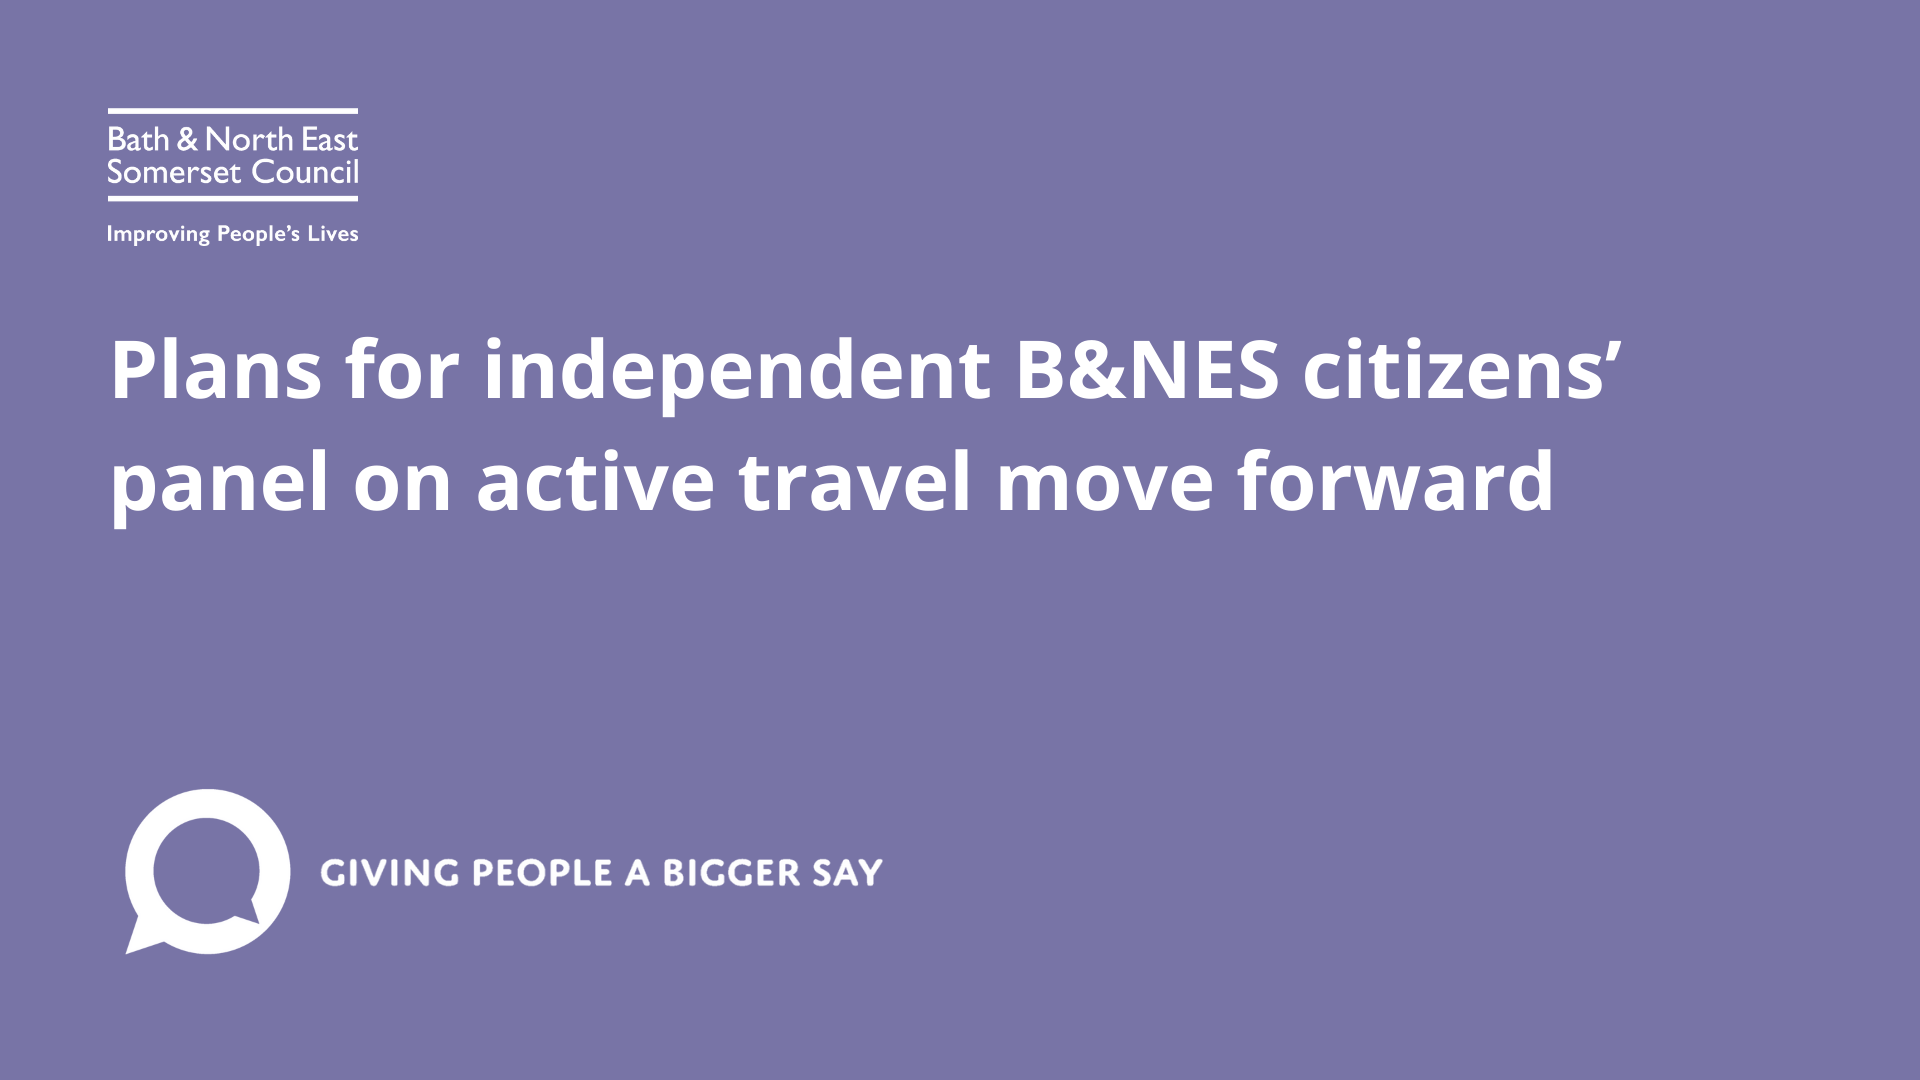 Plans for independent B&NES citizens’ panel on active travel move forward